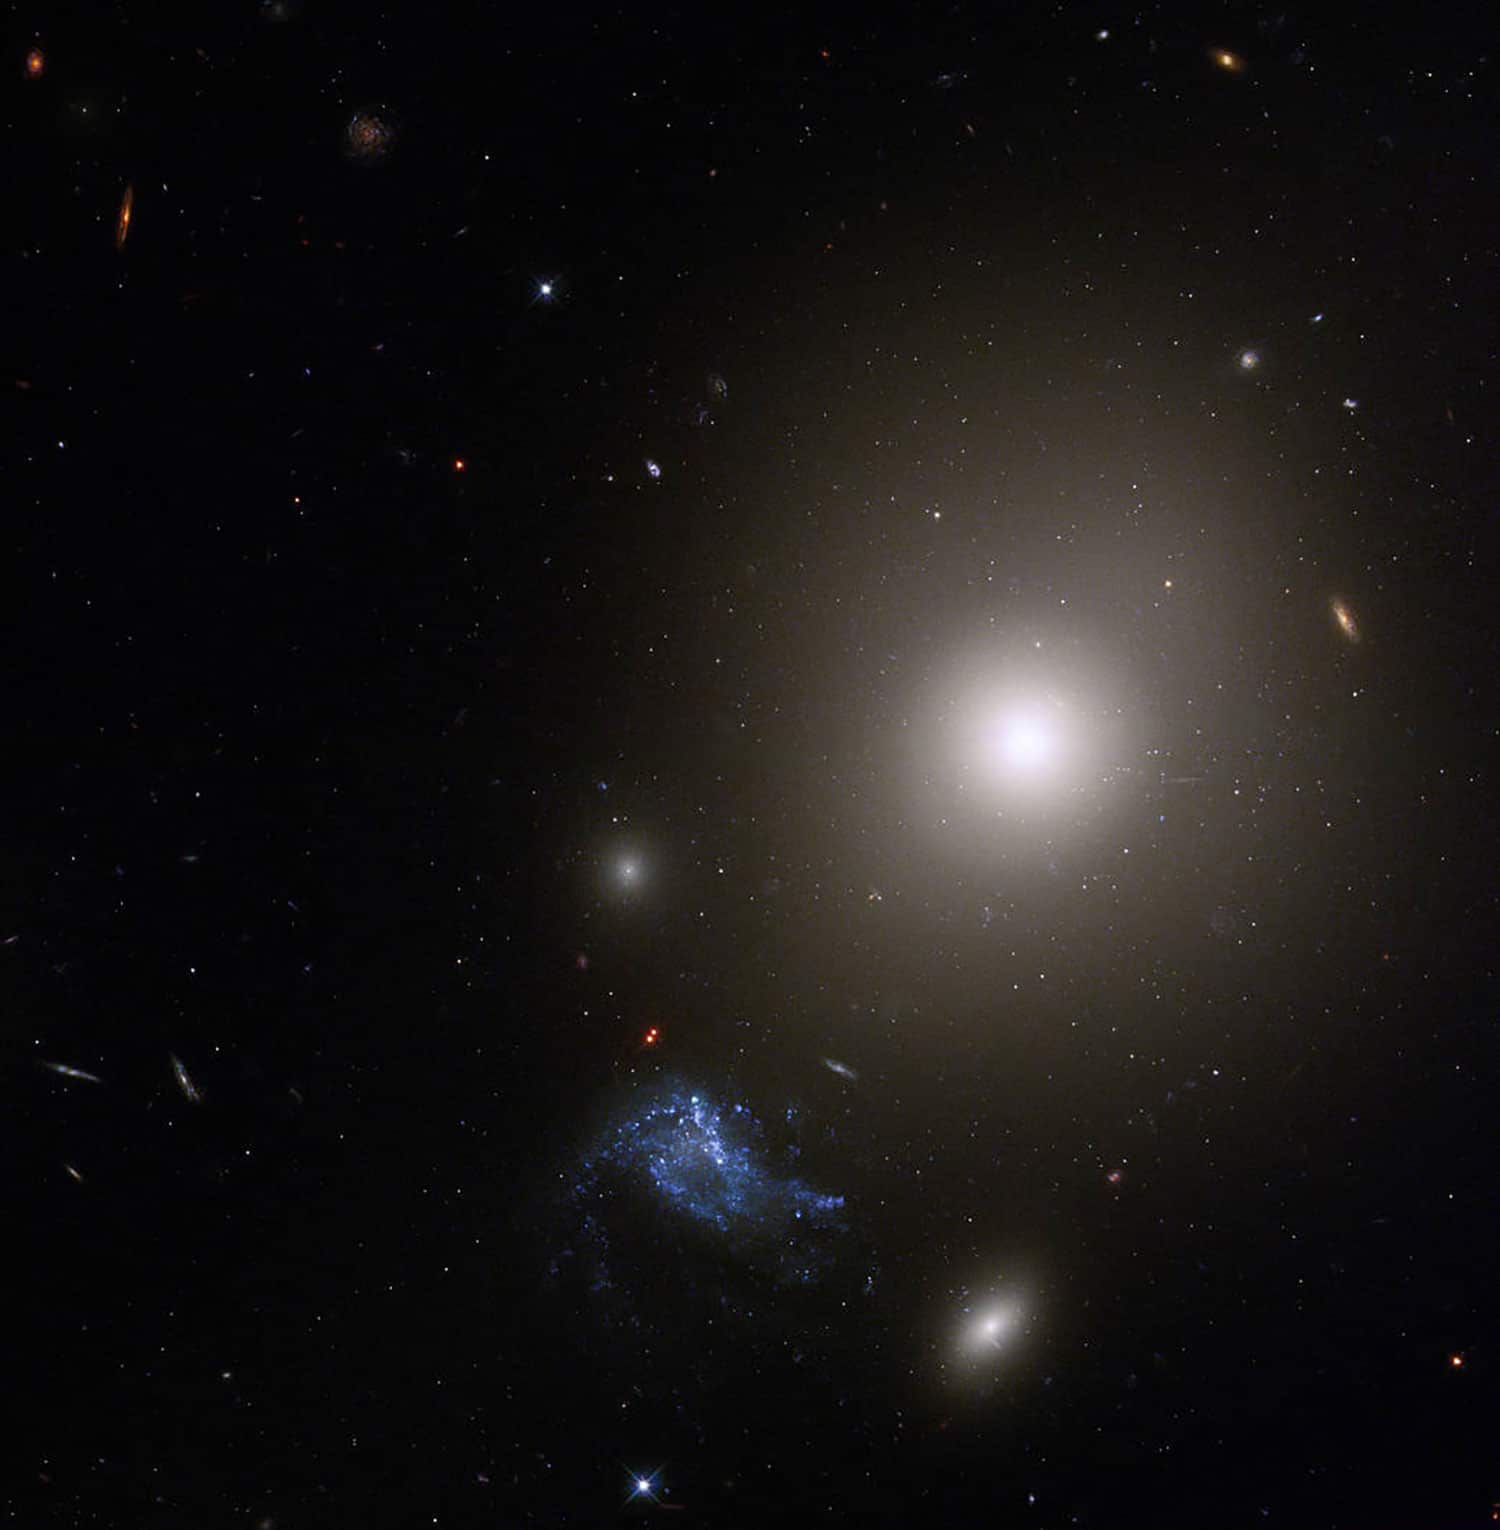 Hubble shares a stunning image of striking pair of galaxy